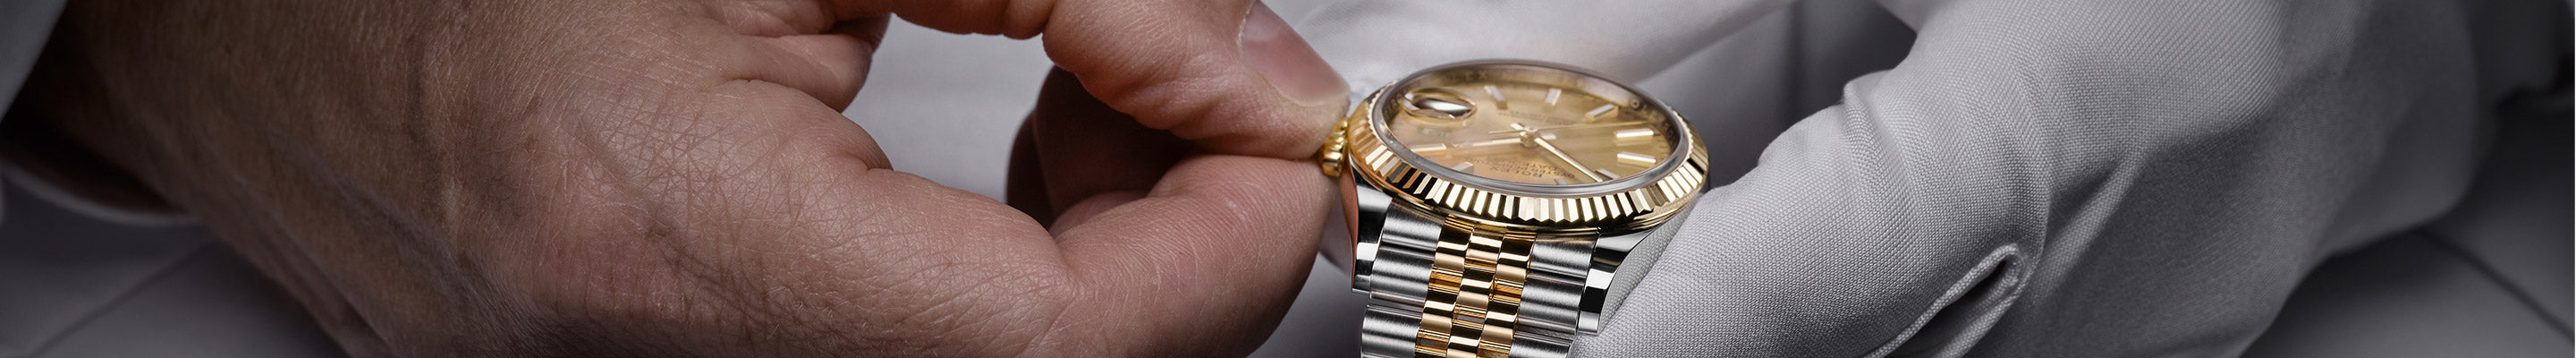 Jeweler Tests Rolex Watch Crown During Servicing at Fink's Jewelers